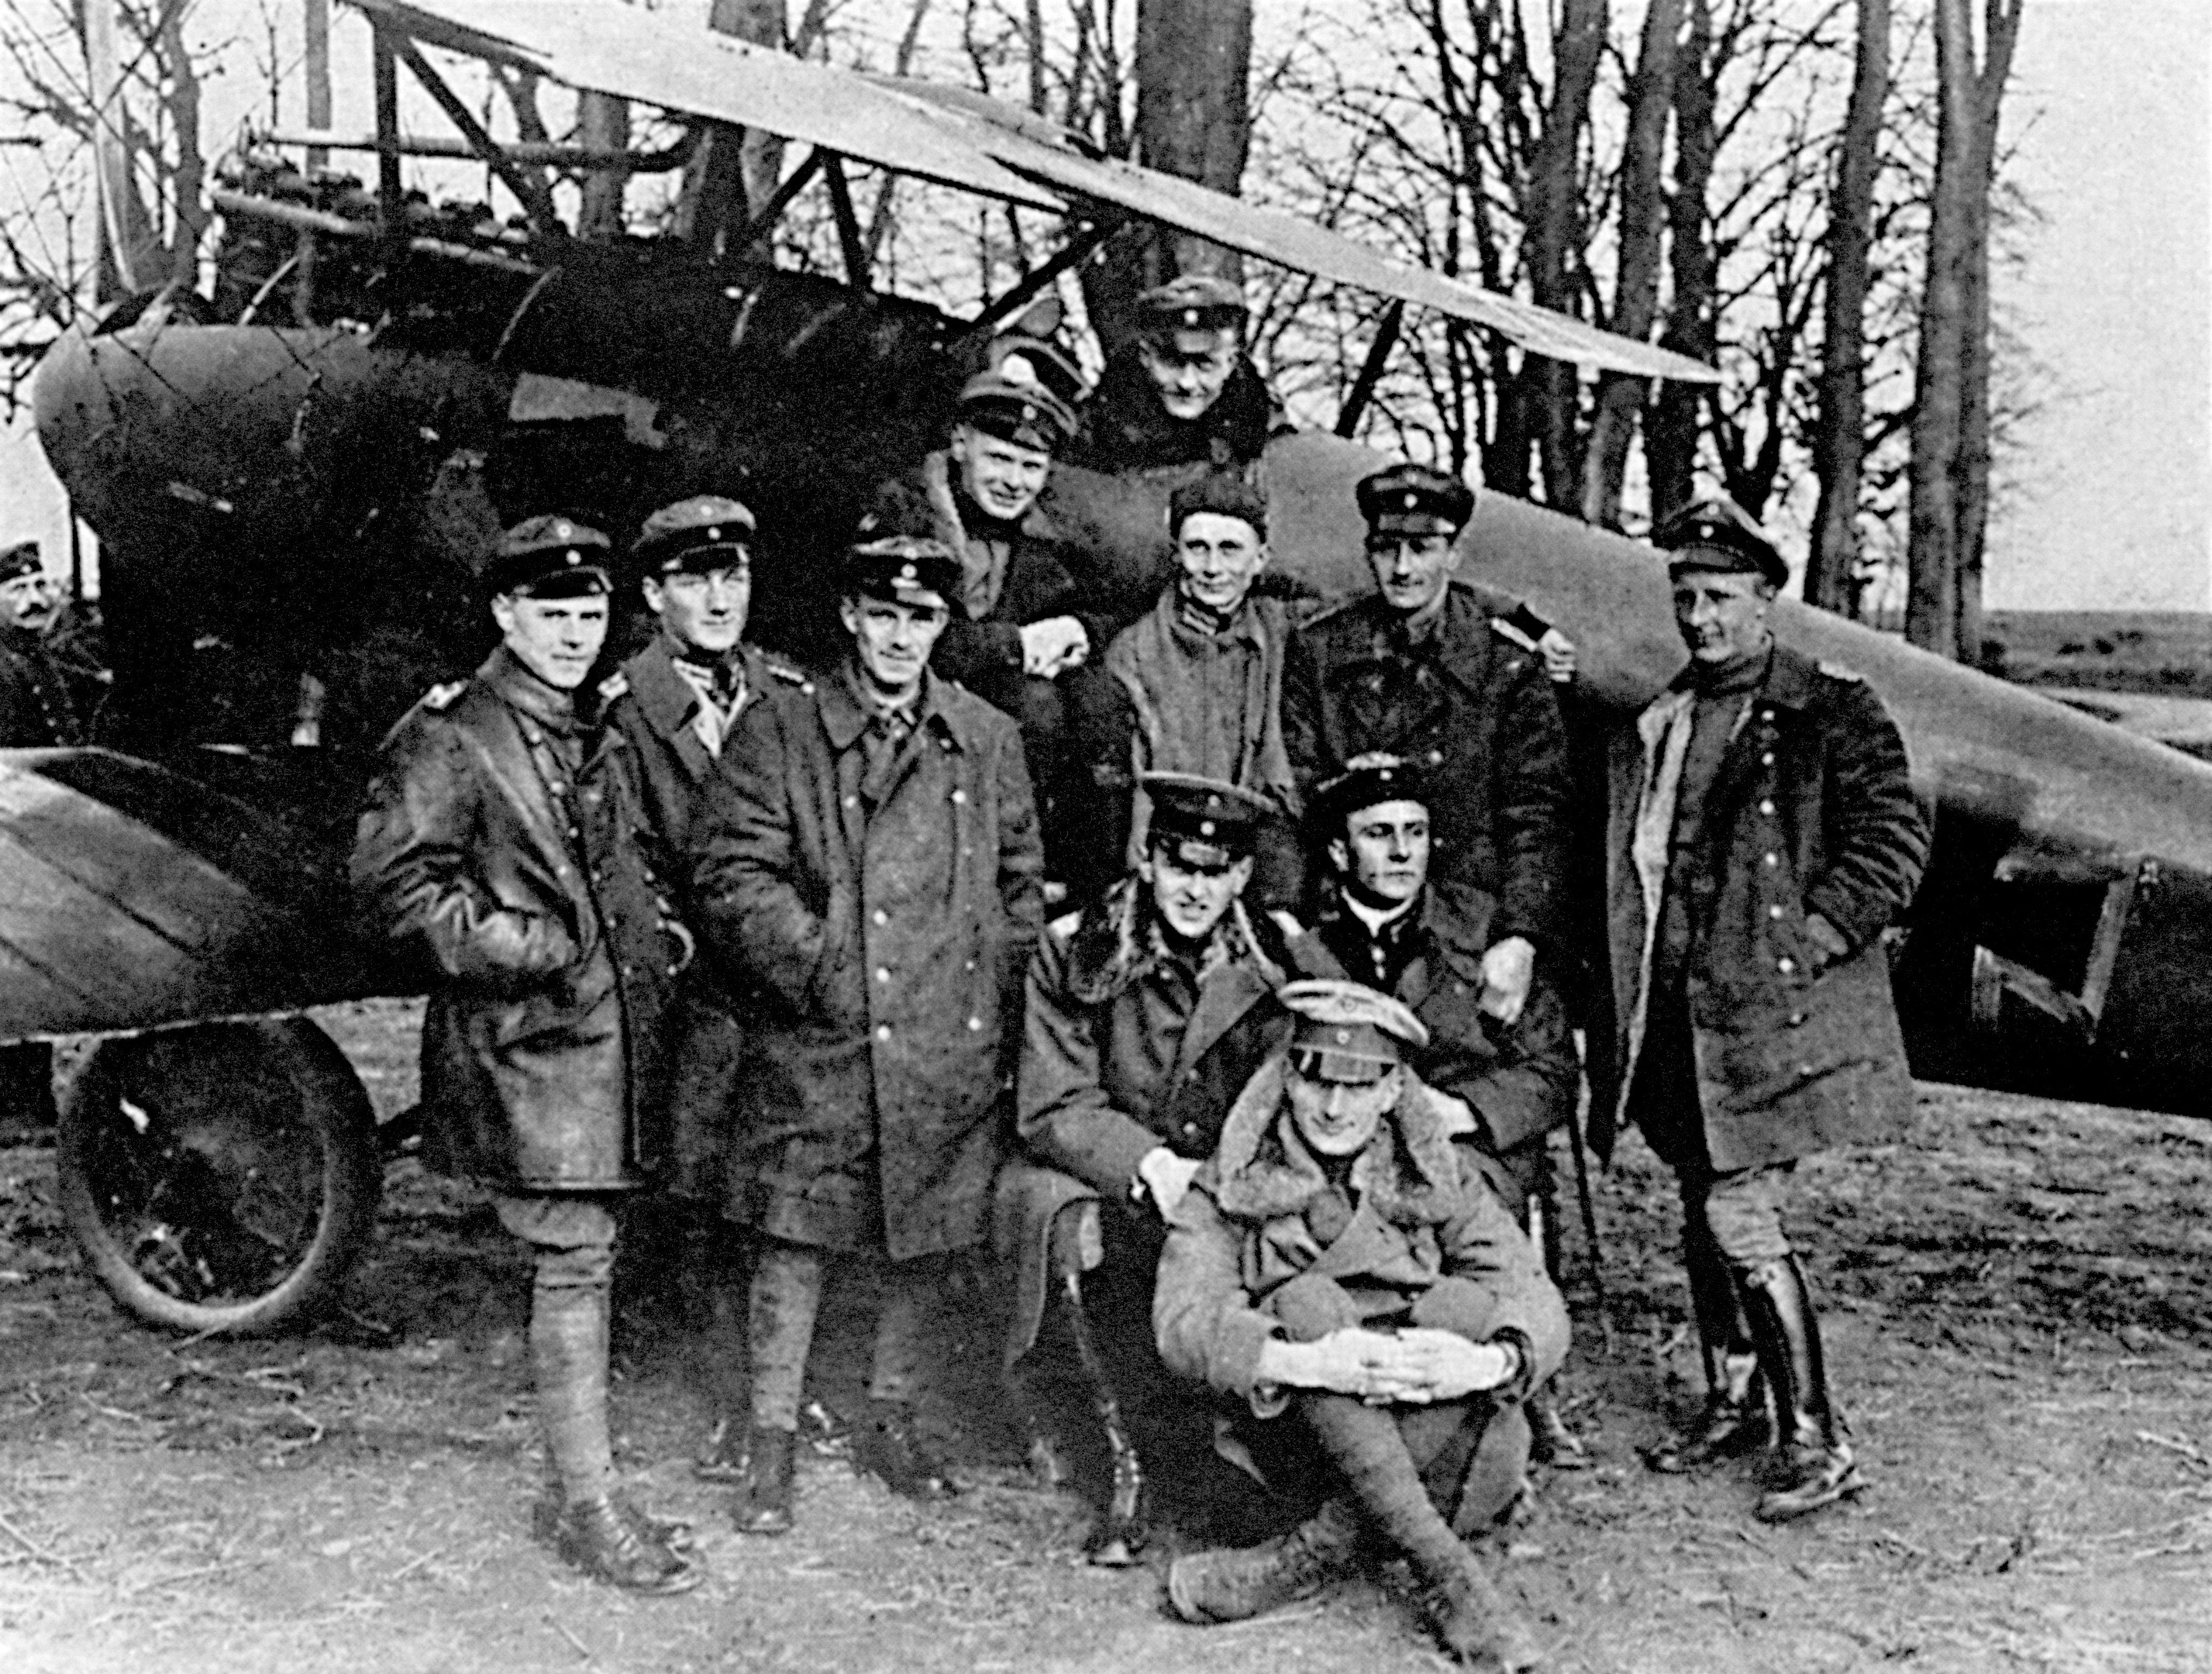 Baron Manfred Freiherr Von Richthofen sits in the cockpit of his Albatros fighter for a photograph with his squadron, Jagdstaffel III.